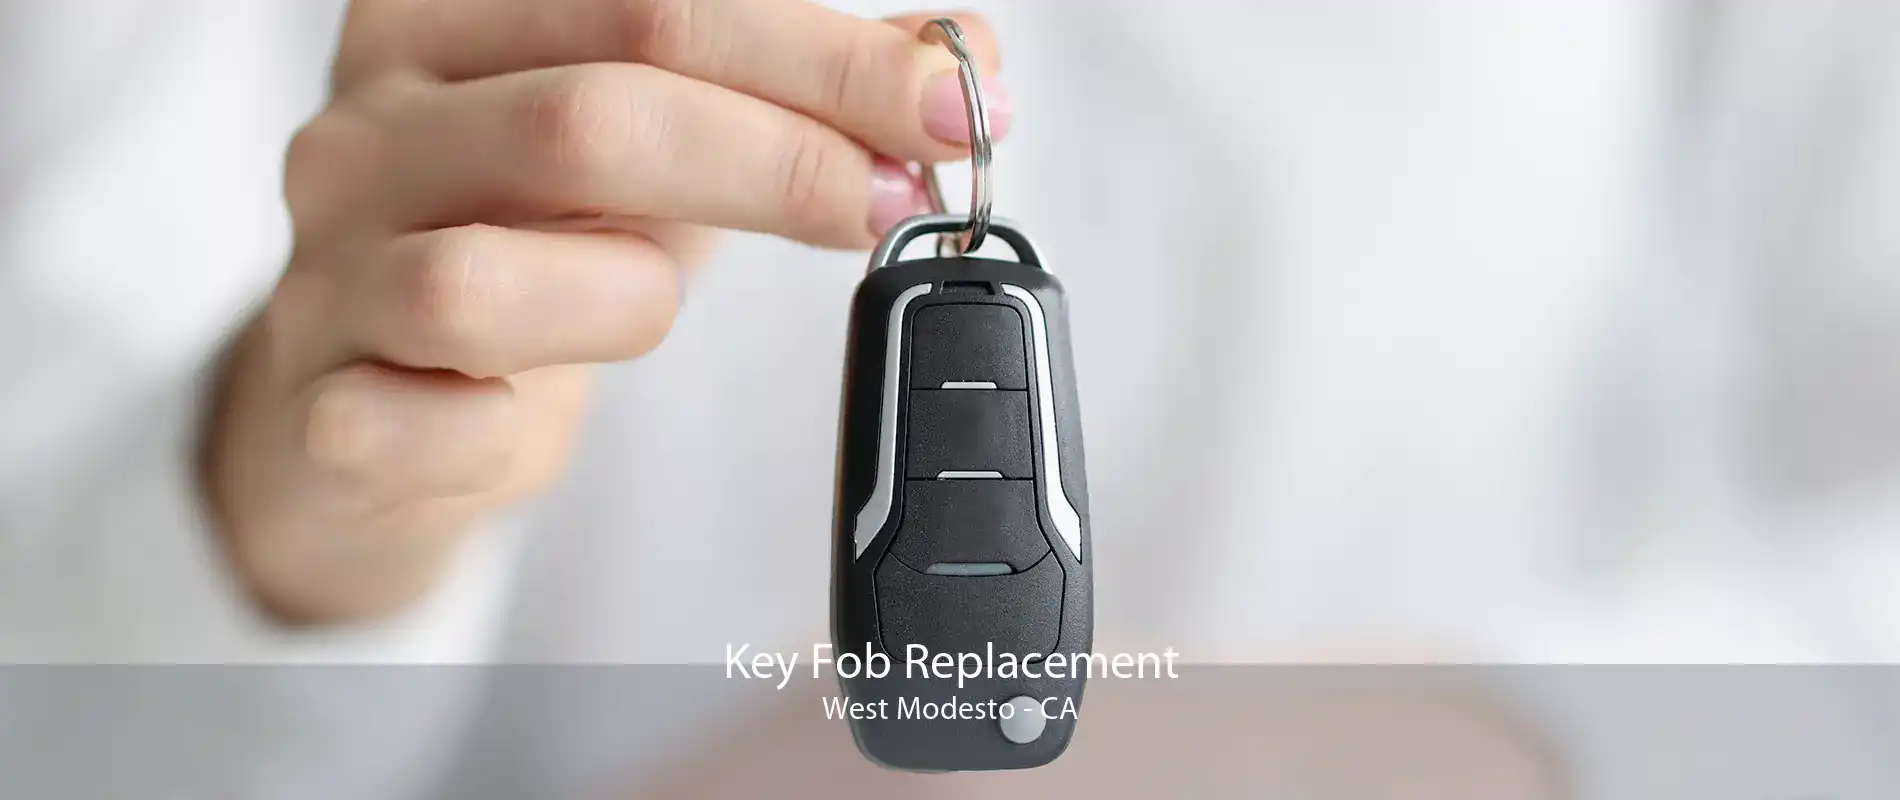 Key Fob Replacement West Modesto - CA